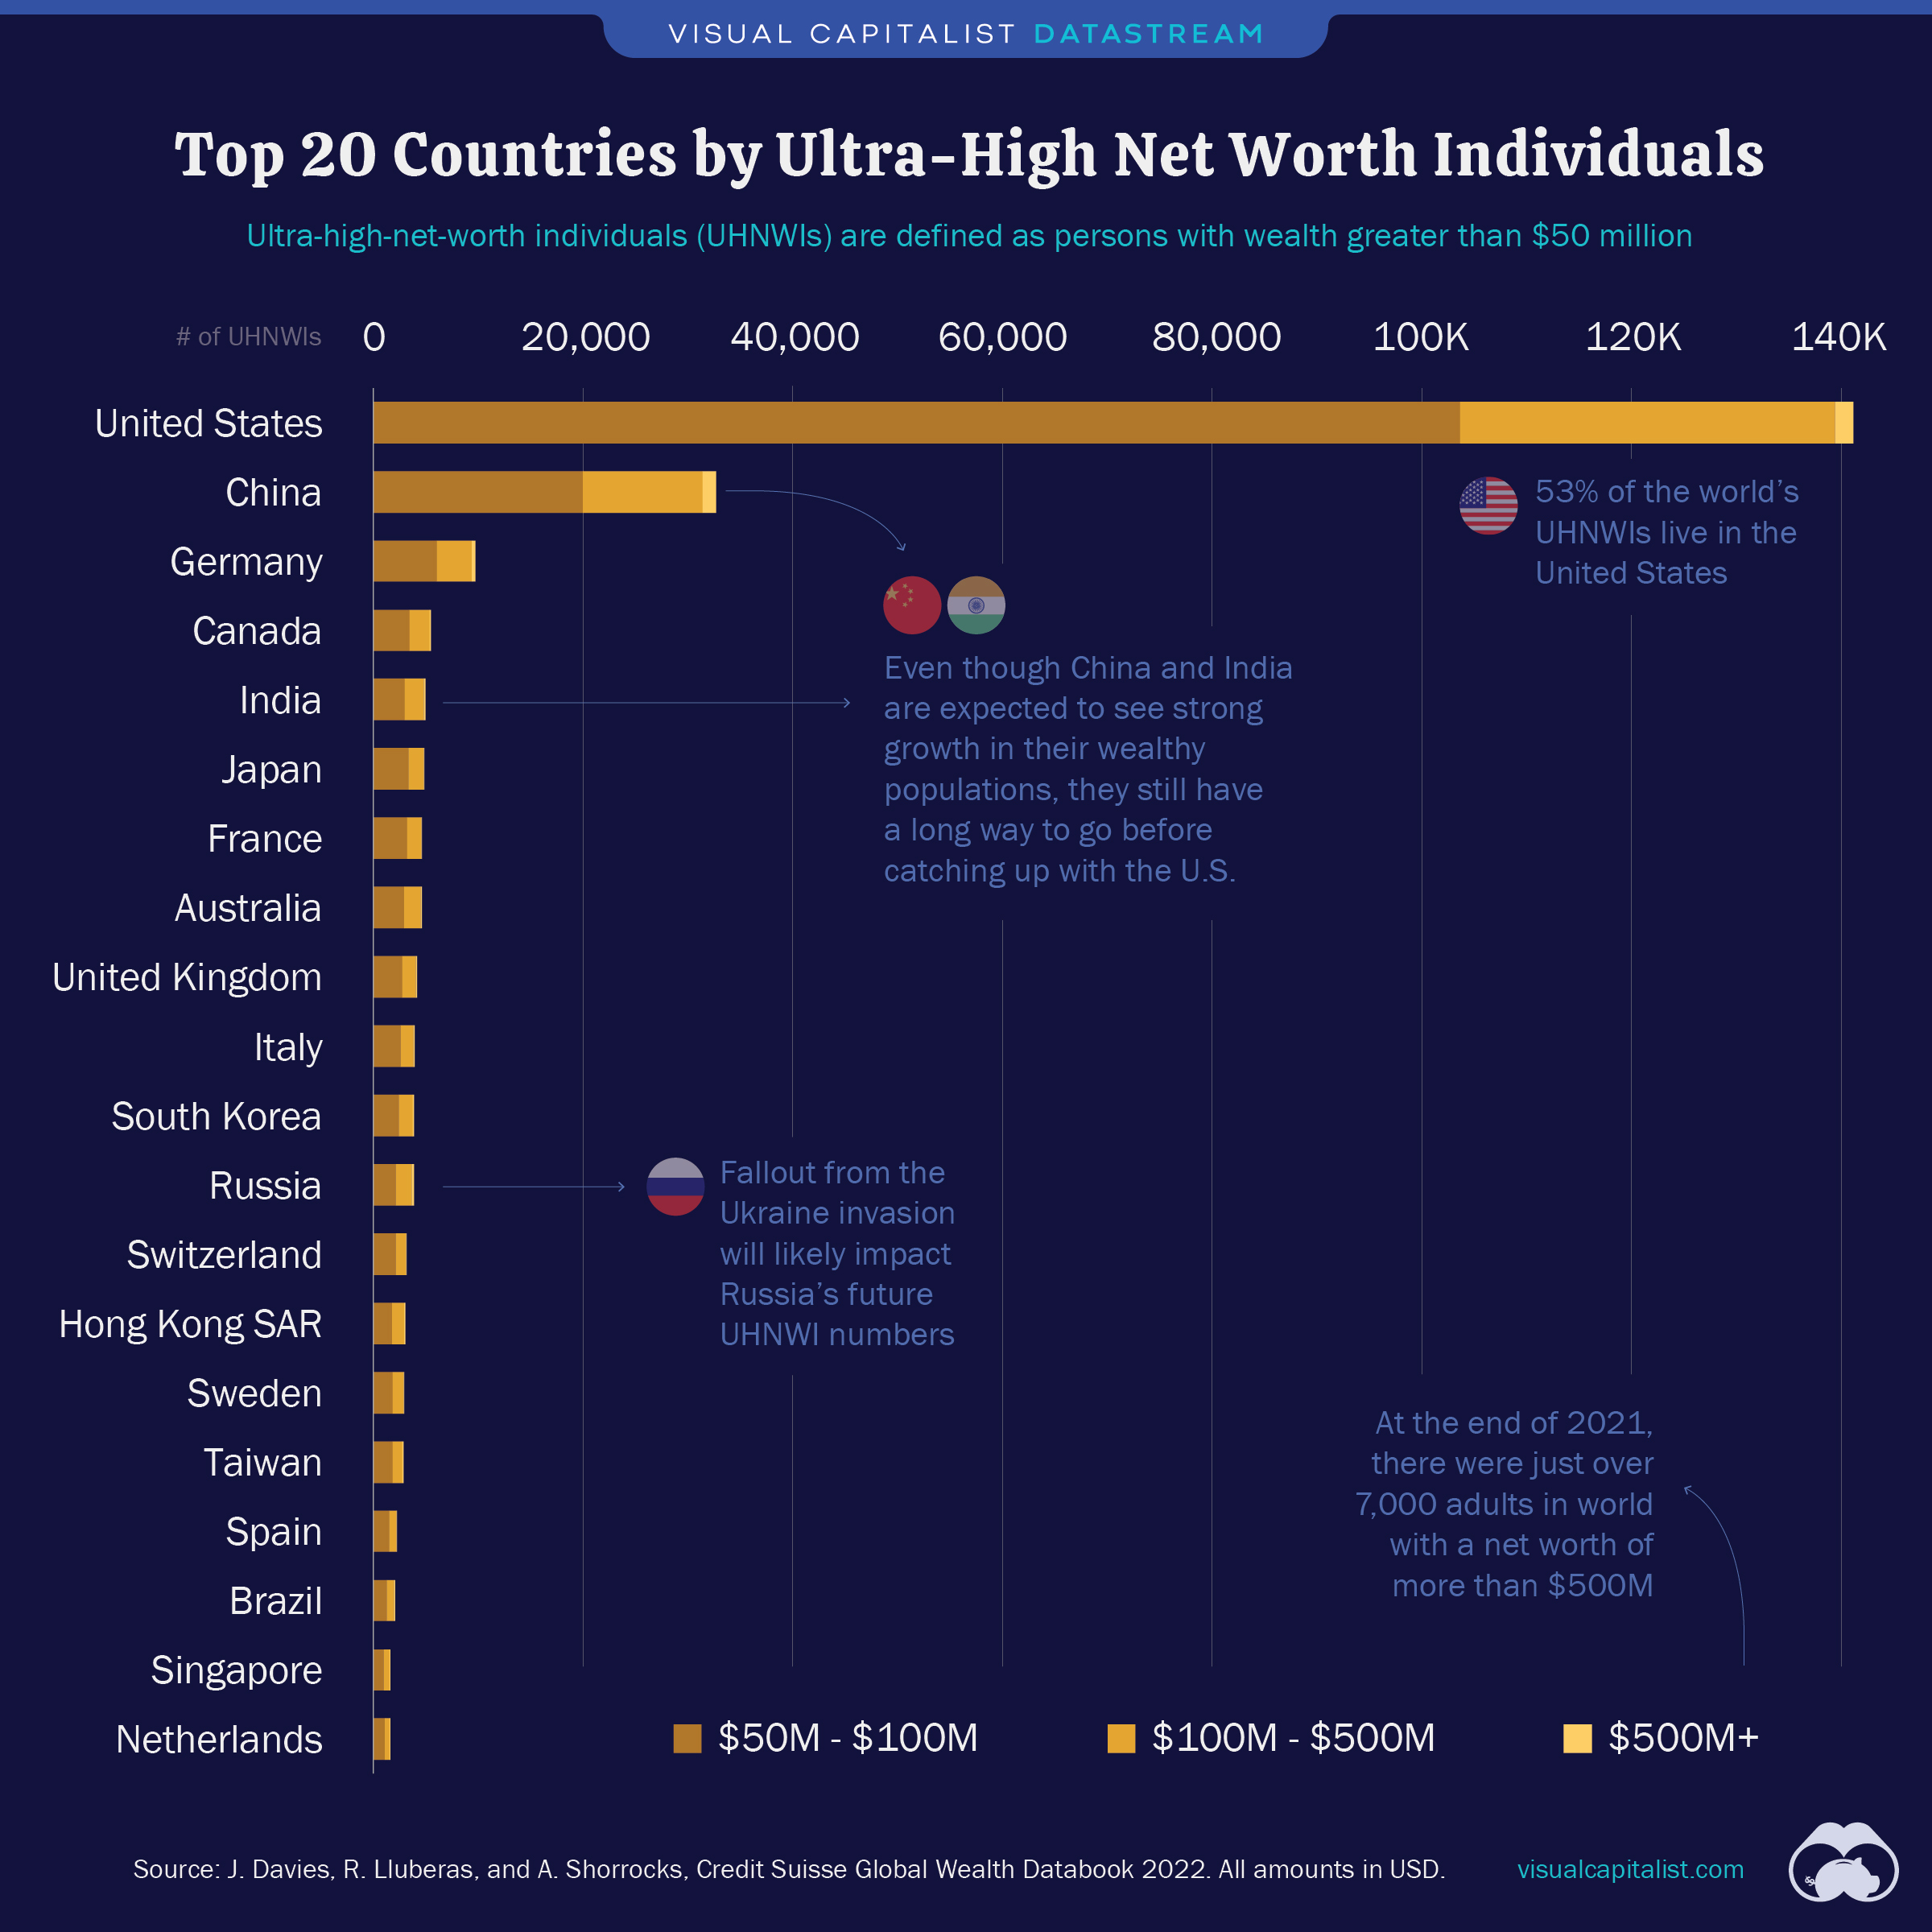 Bar chart showing the top 20 countries with the most ultra-wealthy